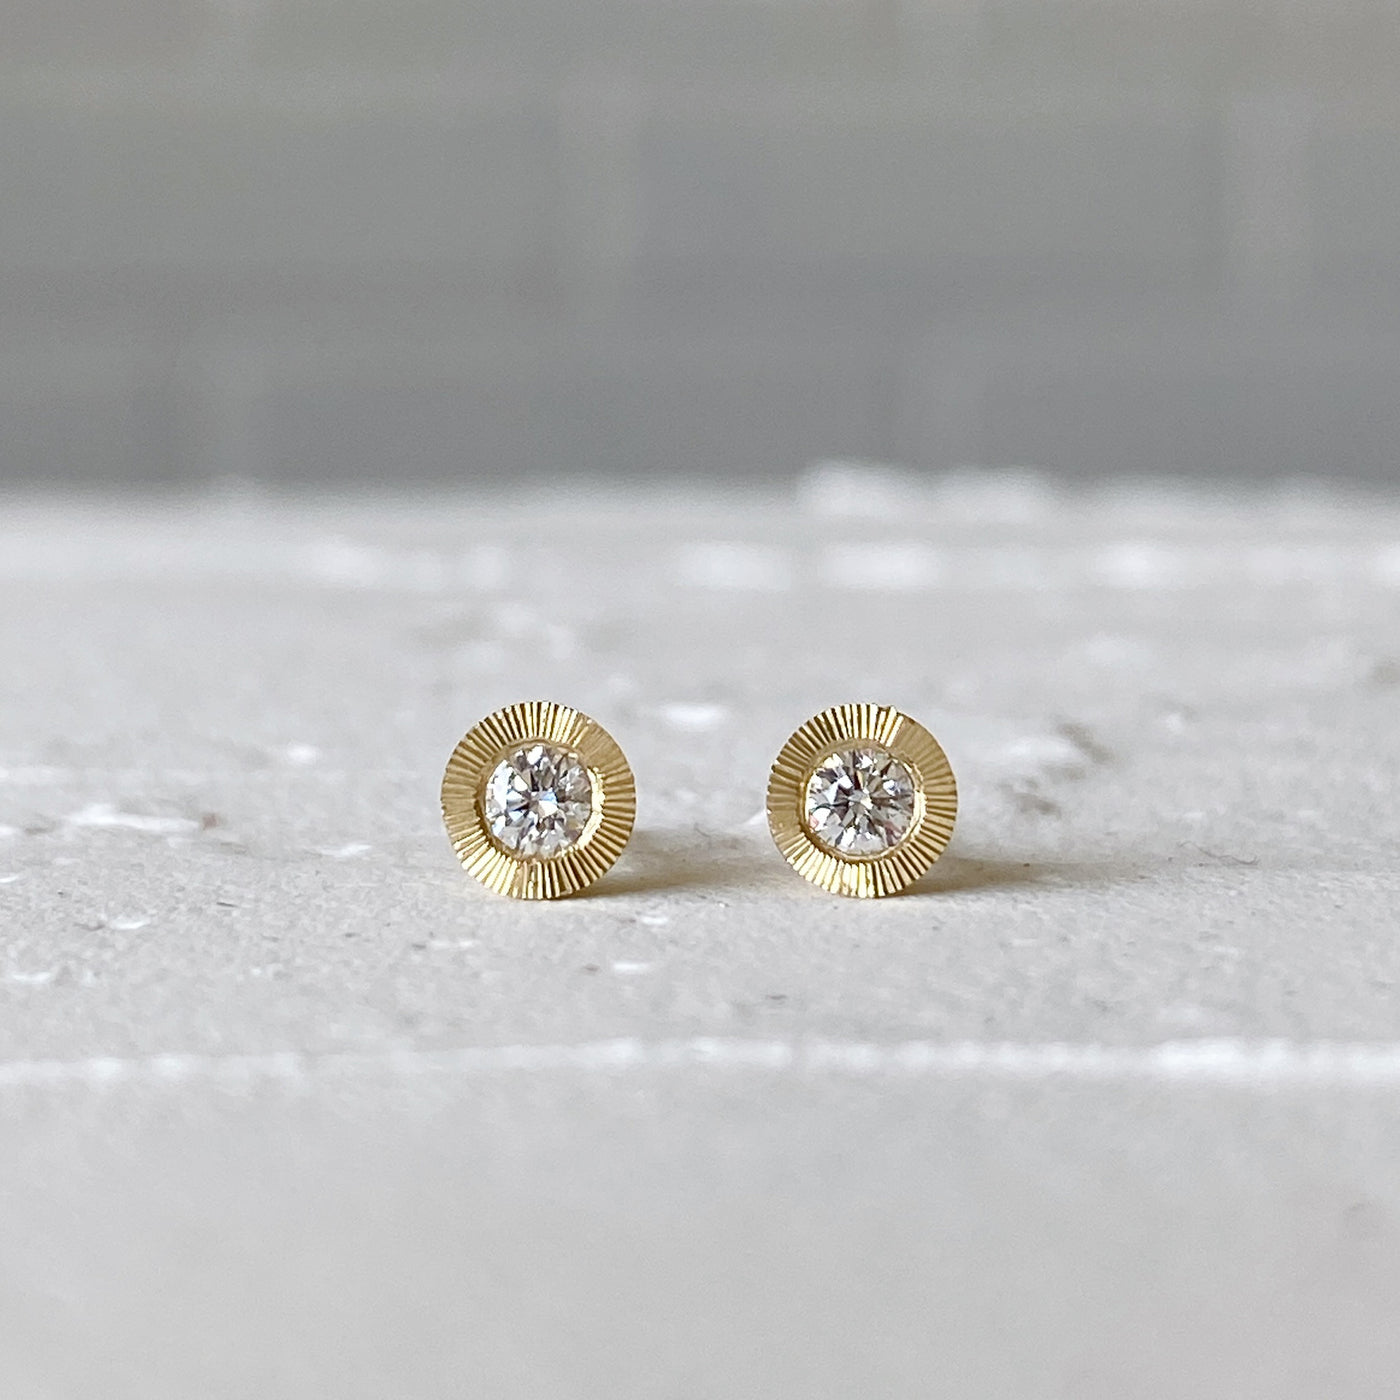 Medium Diamond Aurora stud earring in yellow gold with an engraved halo border in natural light